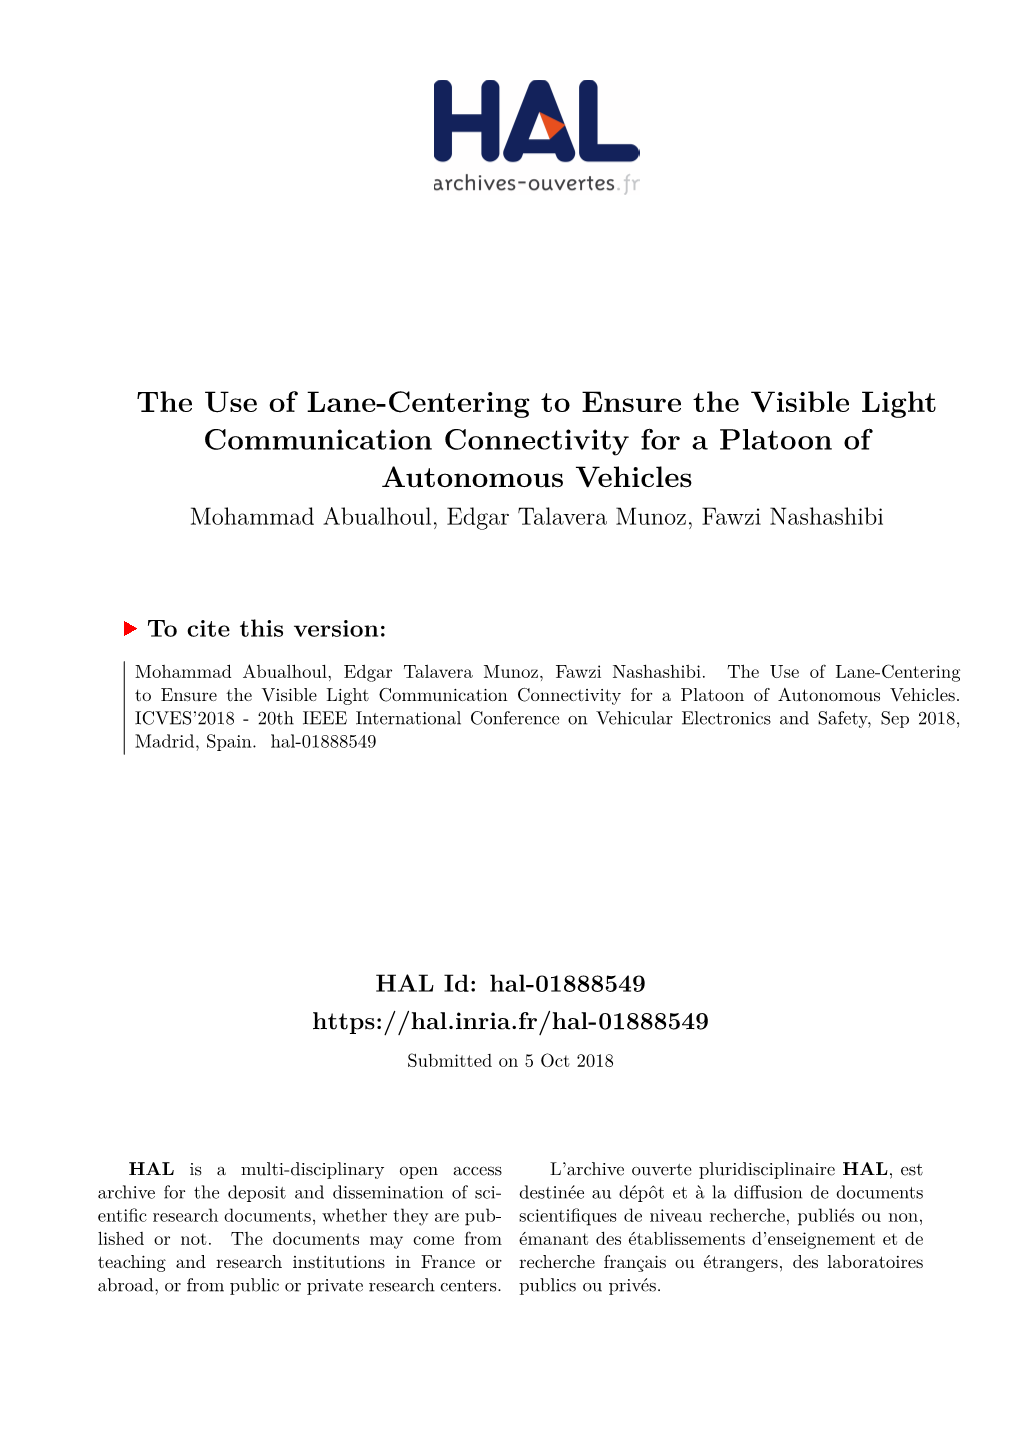 The Use of Lane-Centering to Ensure the Visible Light Communication